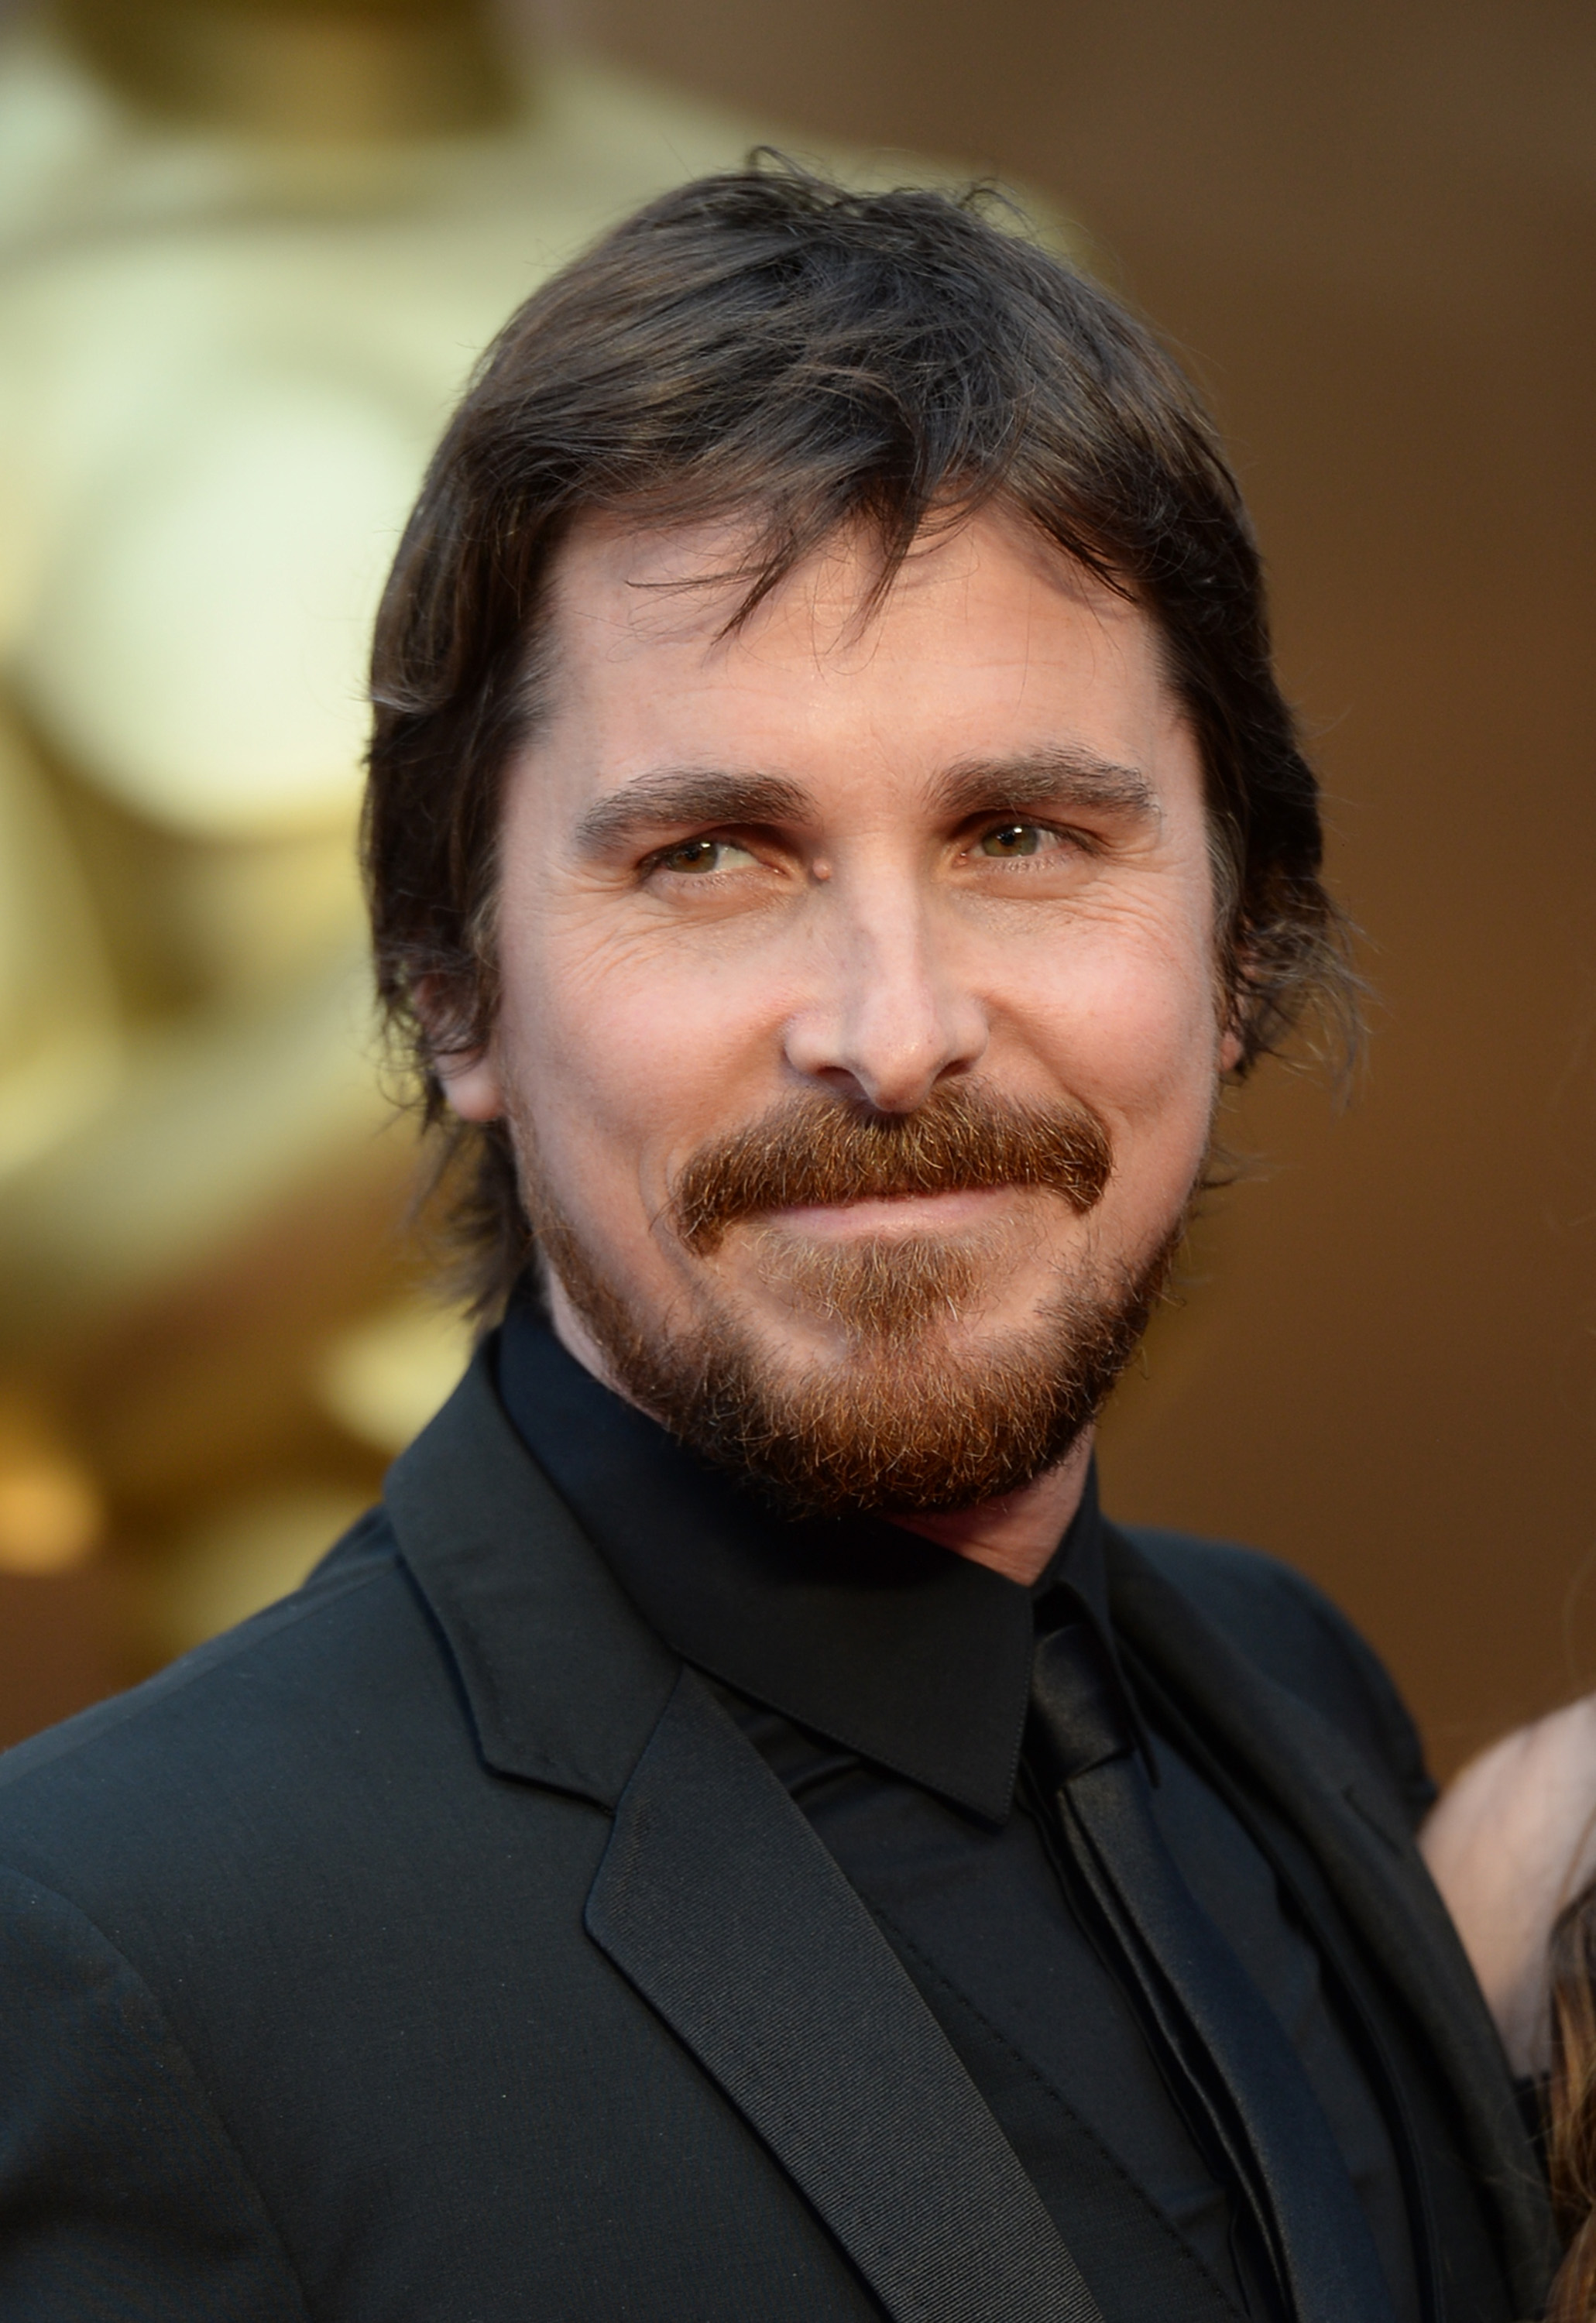 Actor Christian Bale attends the Oscars held at Hollywood and Highland Center on March 2, 2014 in Hollywood.